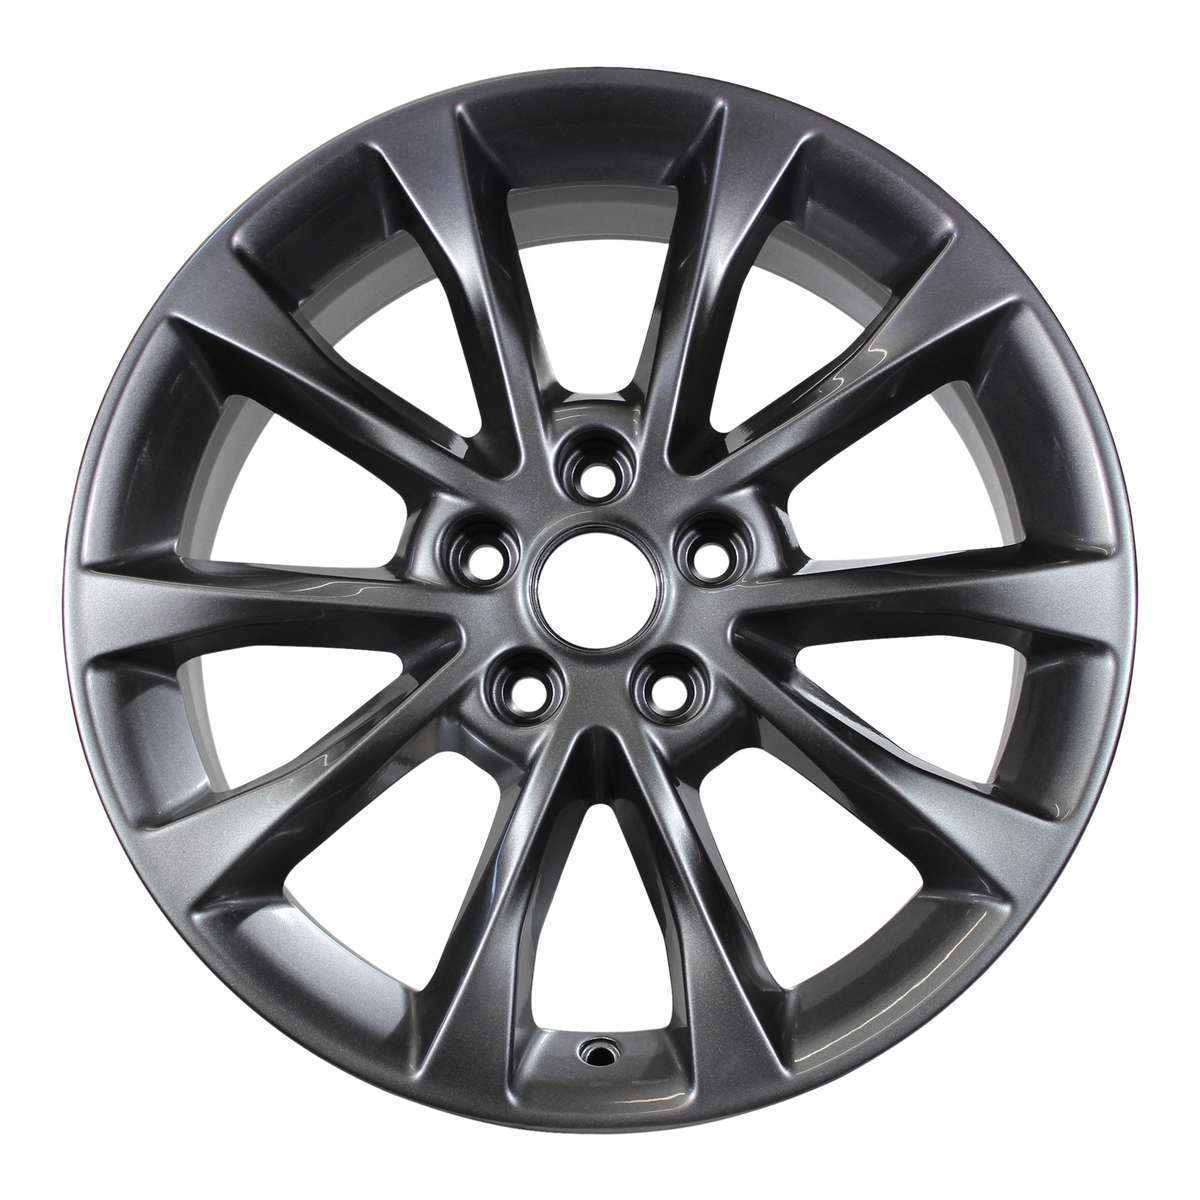 2018 Ford Fusion New 17" Replacement Wheel Rim RW10119C